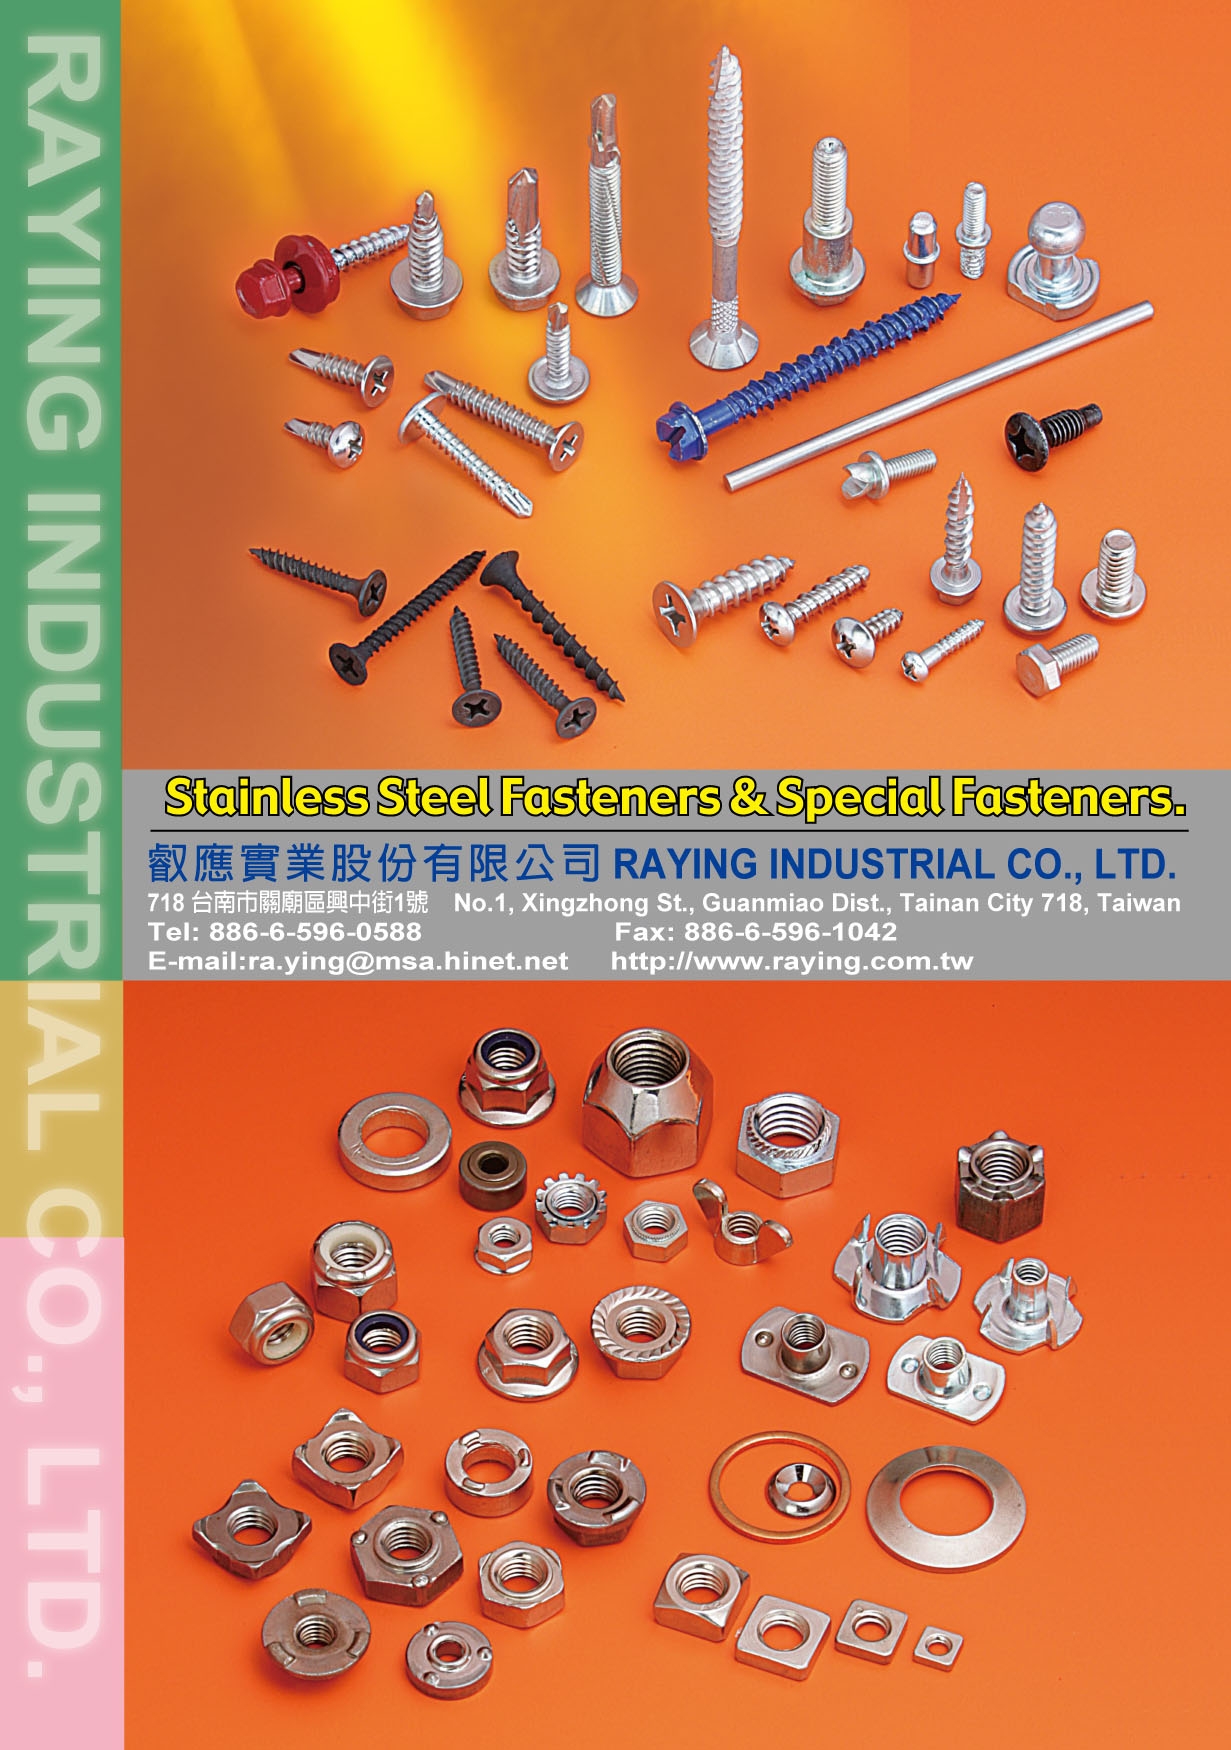 RAYING INDUSTRIAL CO., LTD. _Online Catalogues